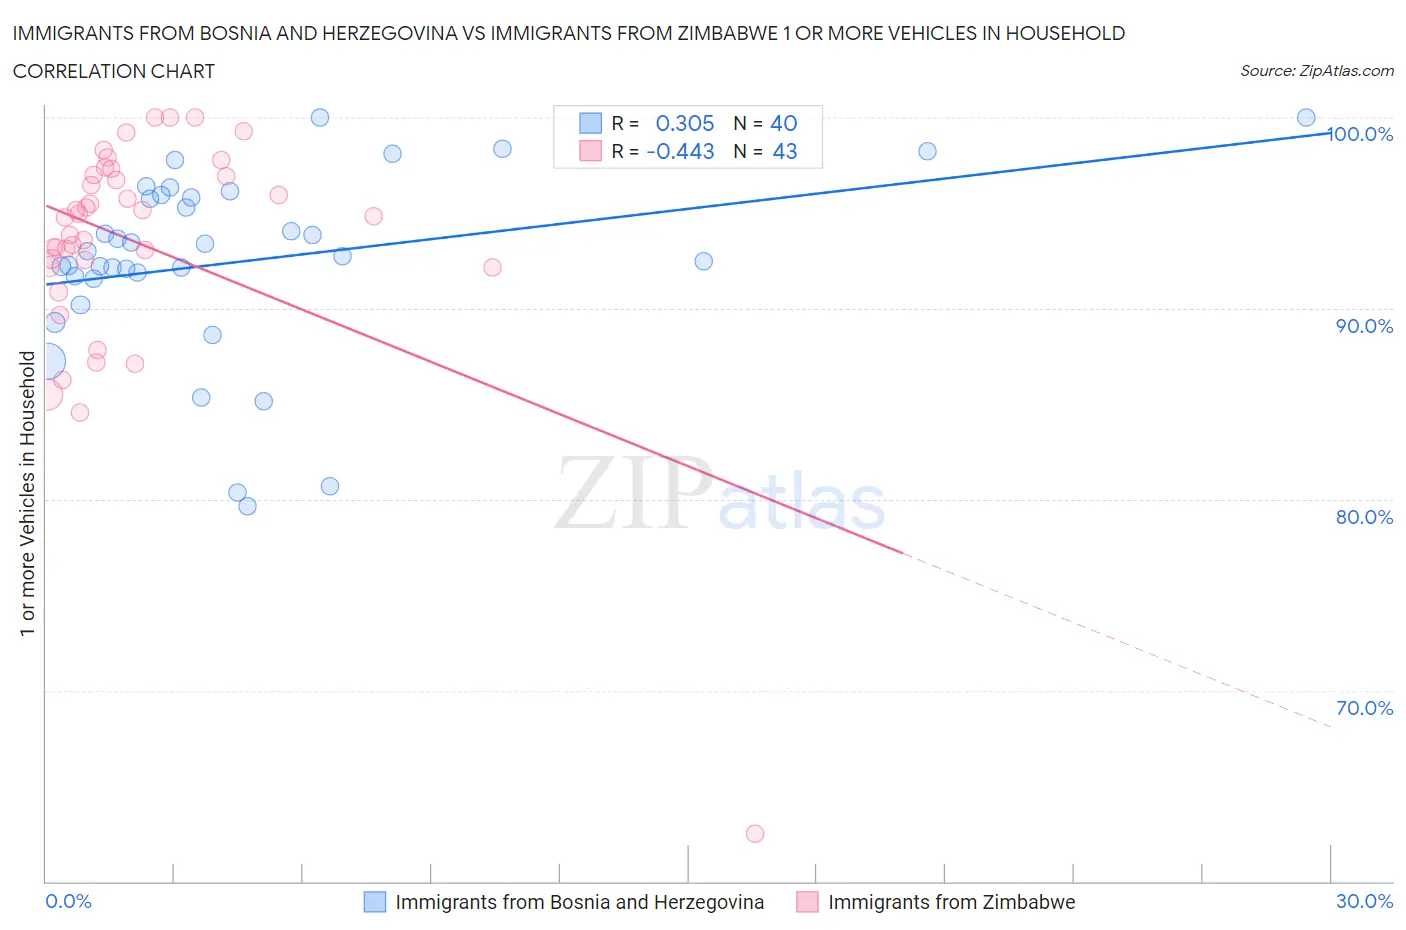 Immigrants from Bosnia and Herzegovina vs Immigrants from Zimbabwe 1 or more Vehicles in Household